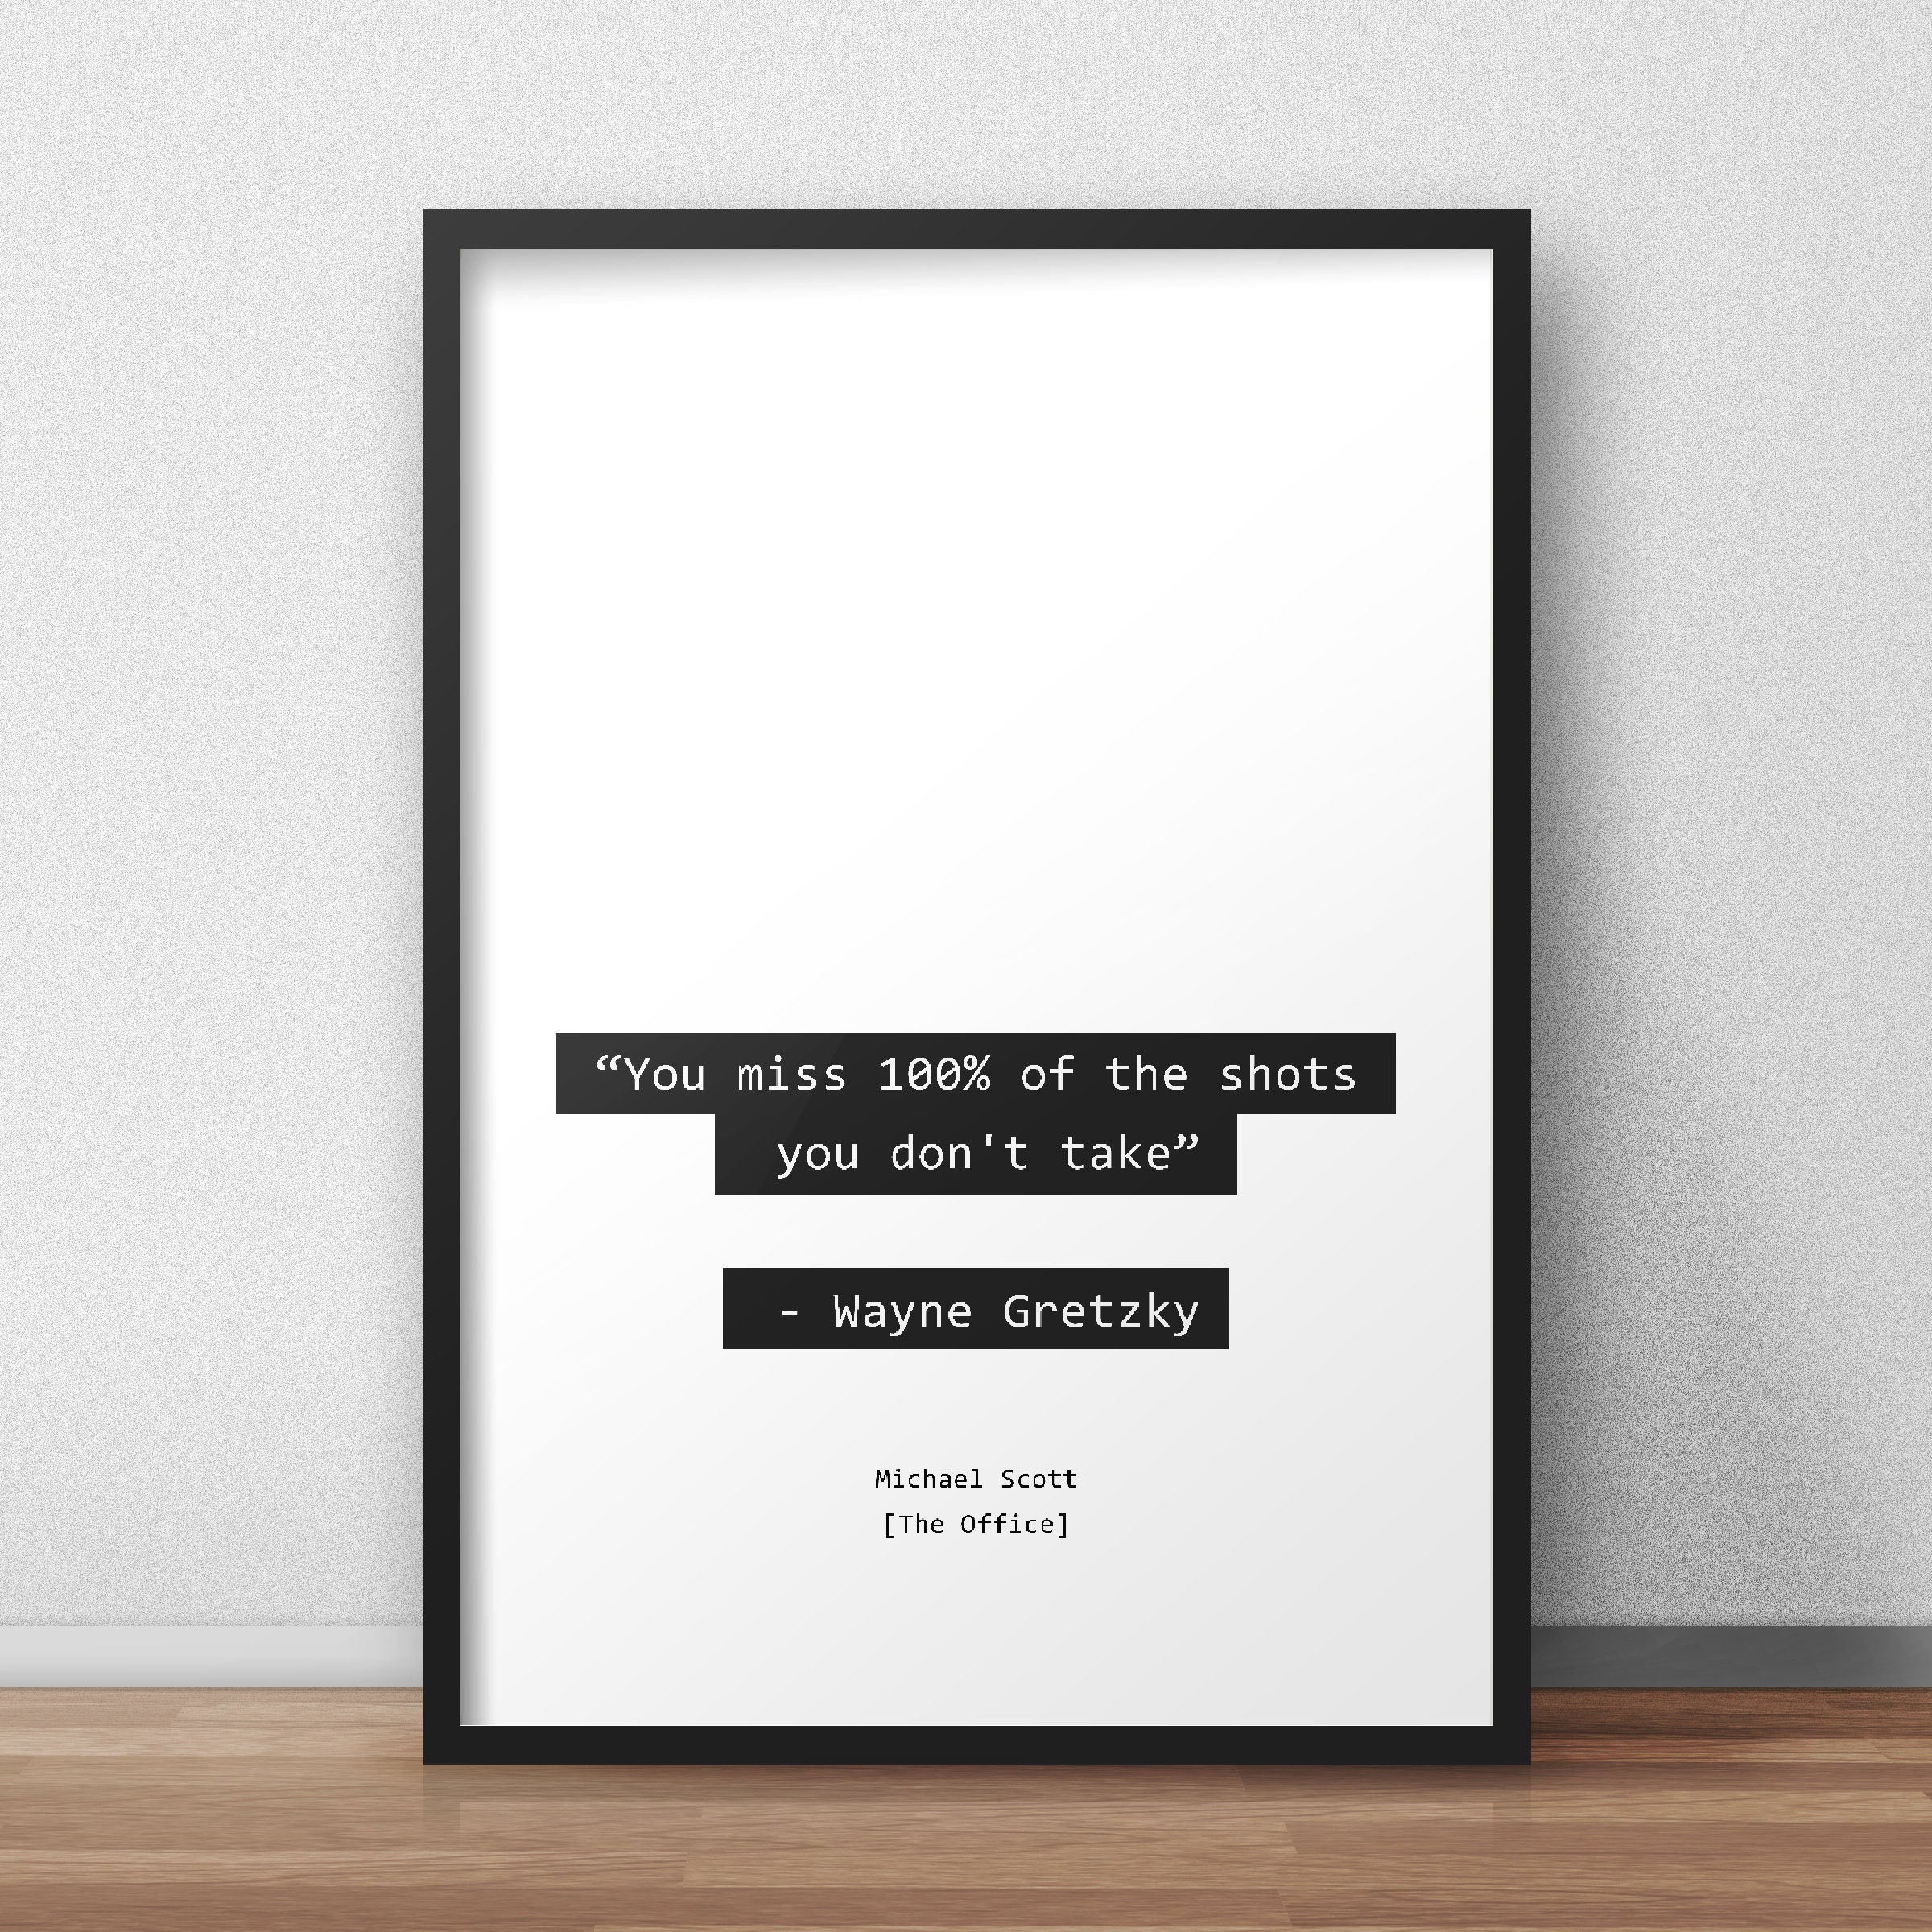 Wayne Gretzky Inspirational Quote on Print. See more at www